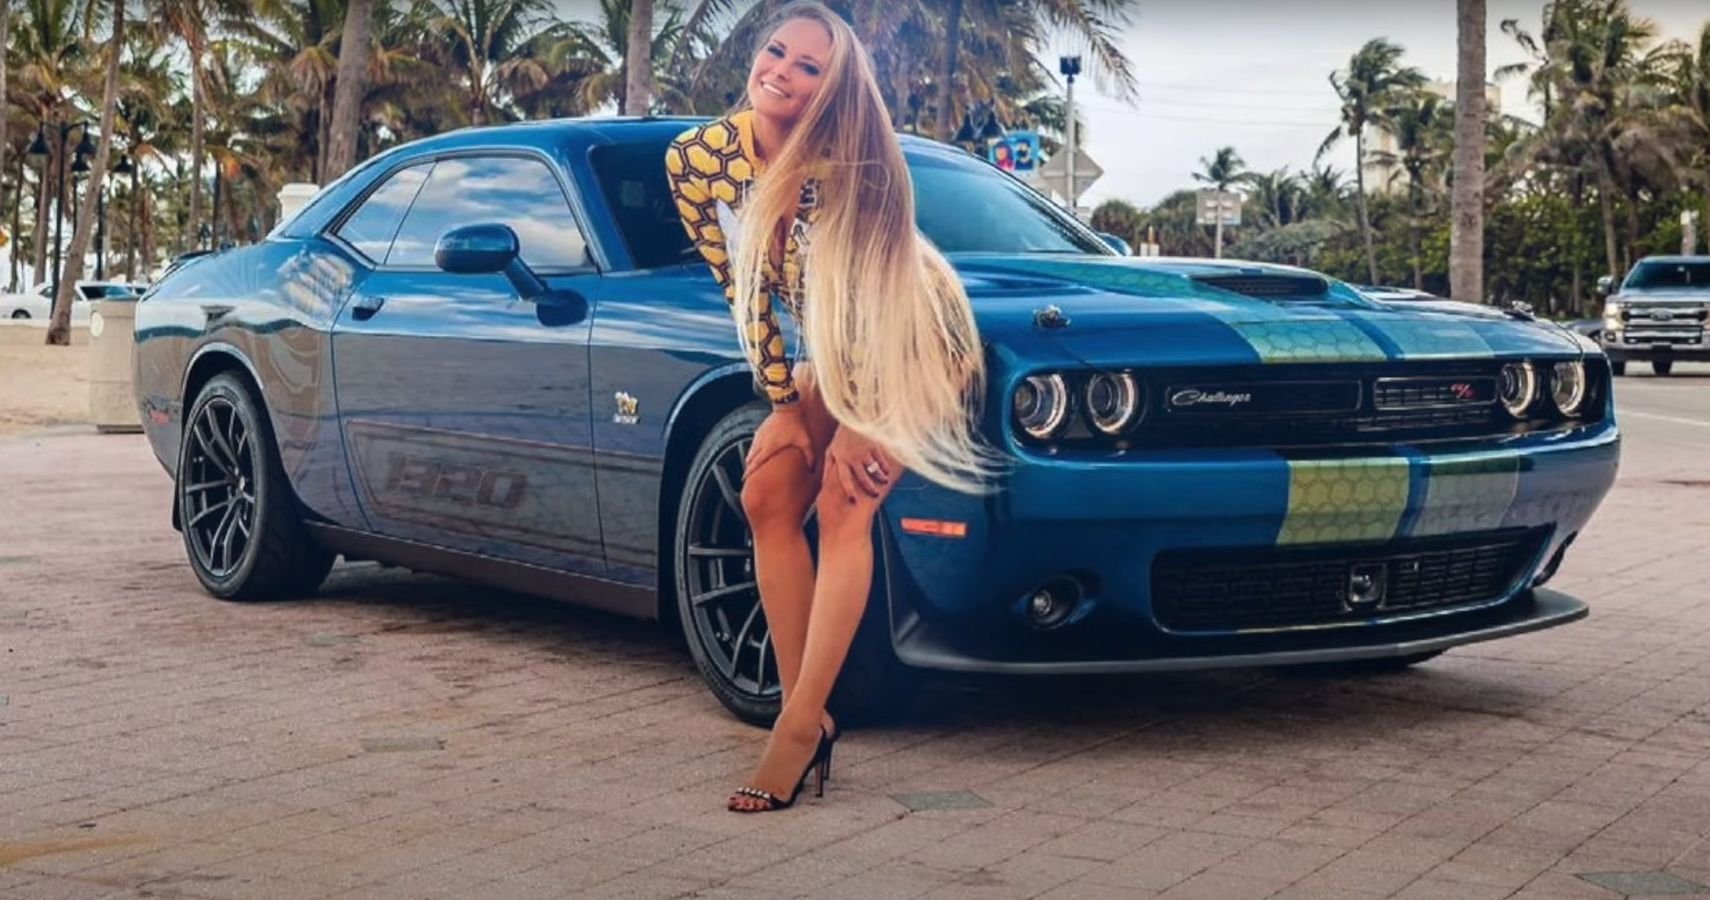 Playboy Playmate Audra Lynn Gets Her Dodge Challenger Wrapped